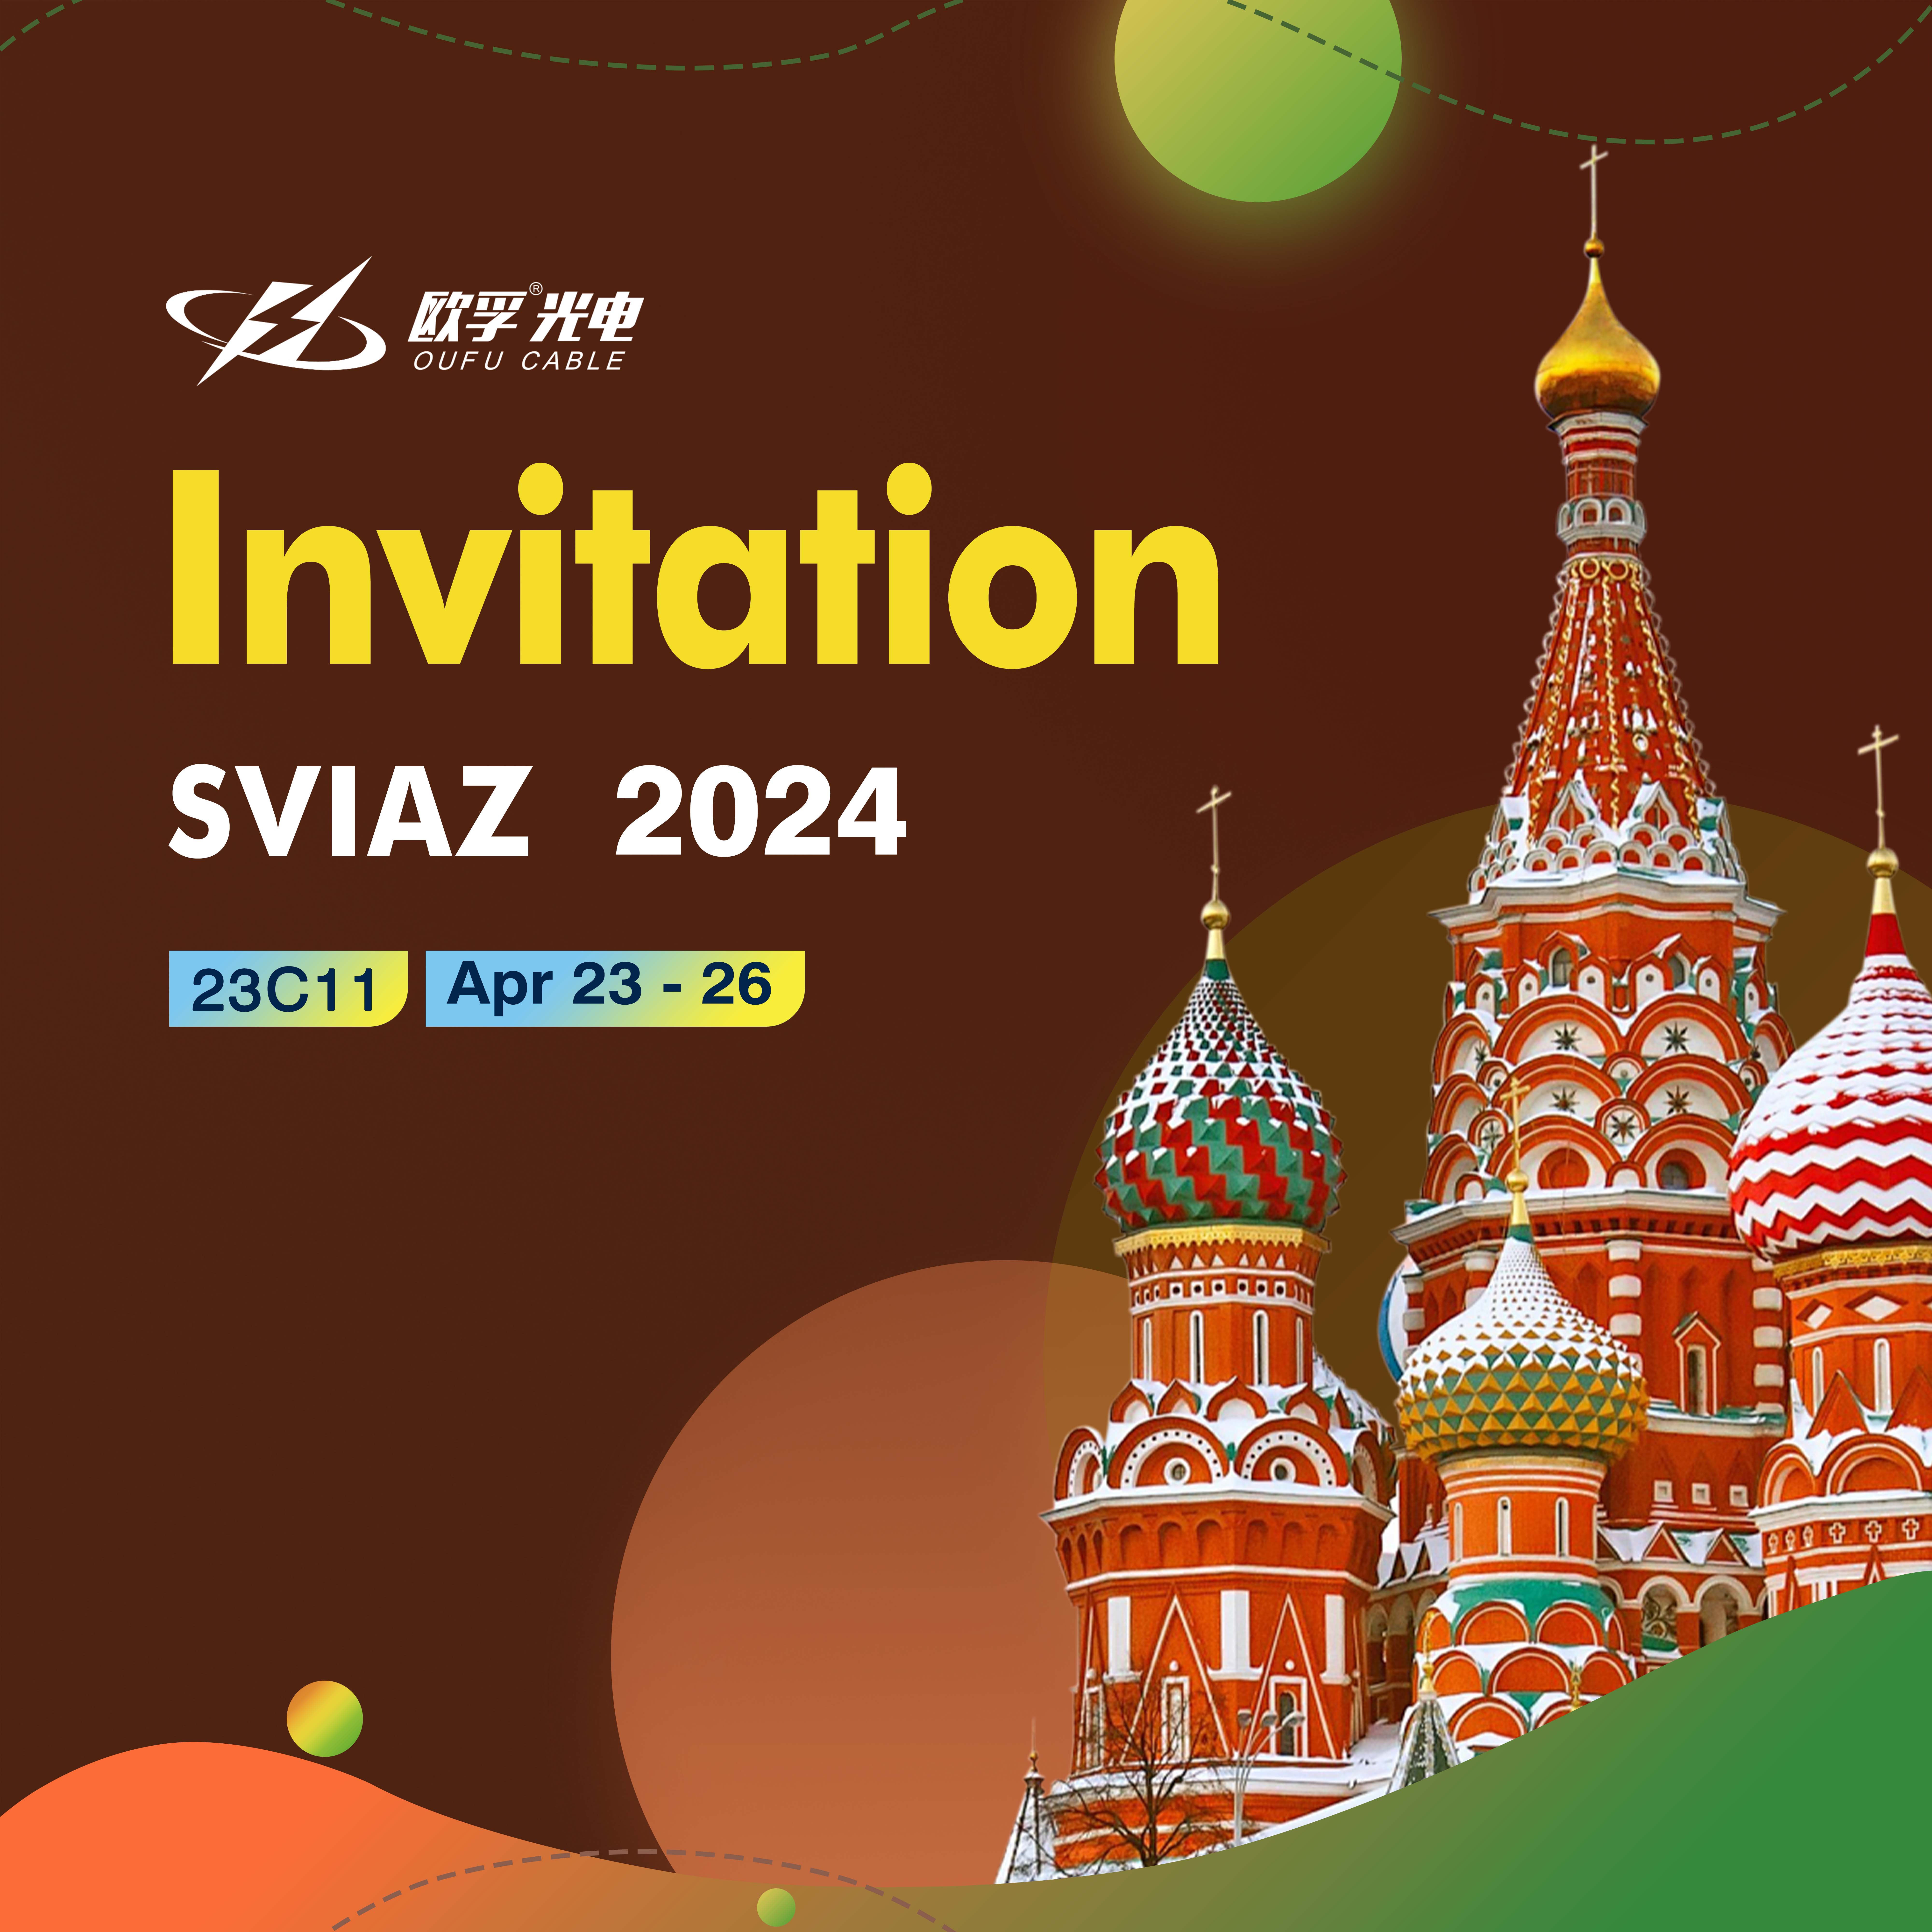 SVIAZ 2024 is coming！In Russia